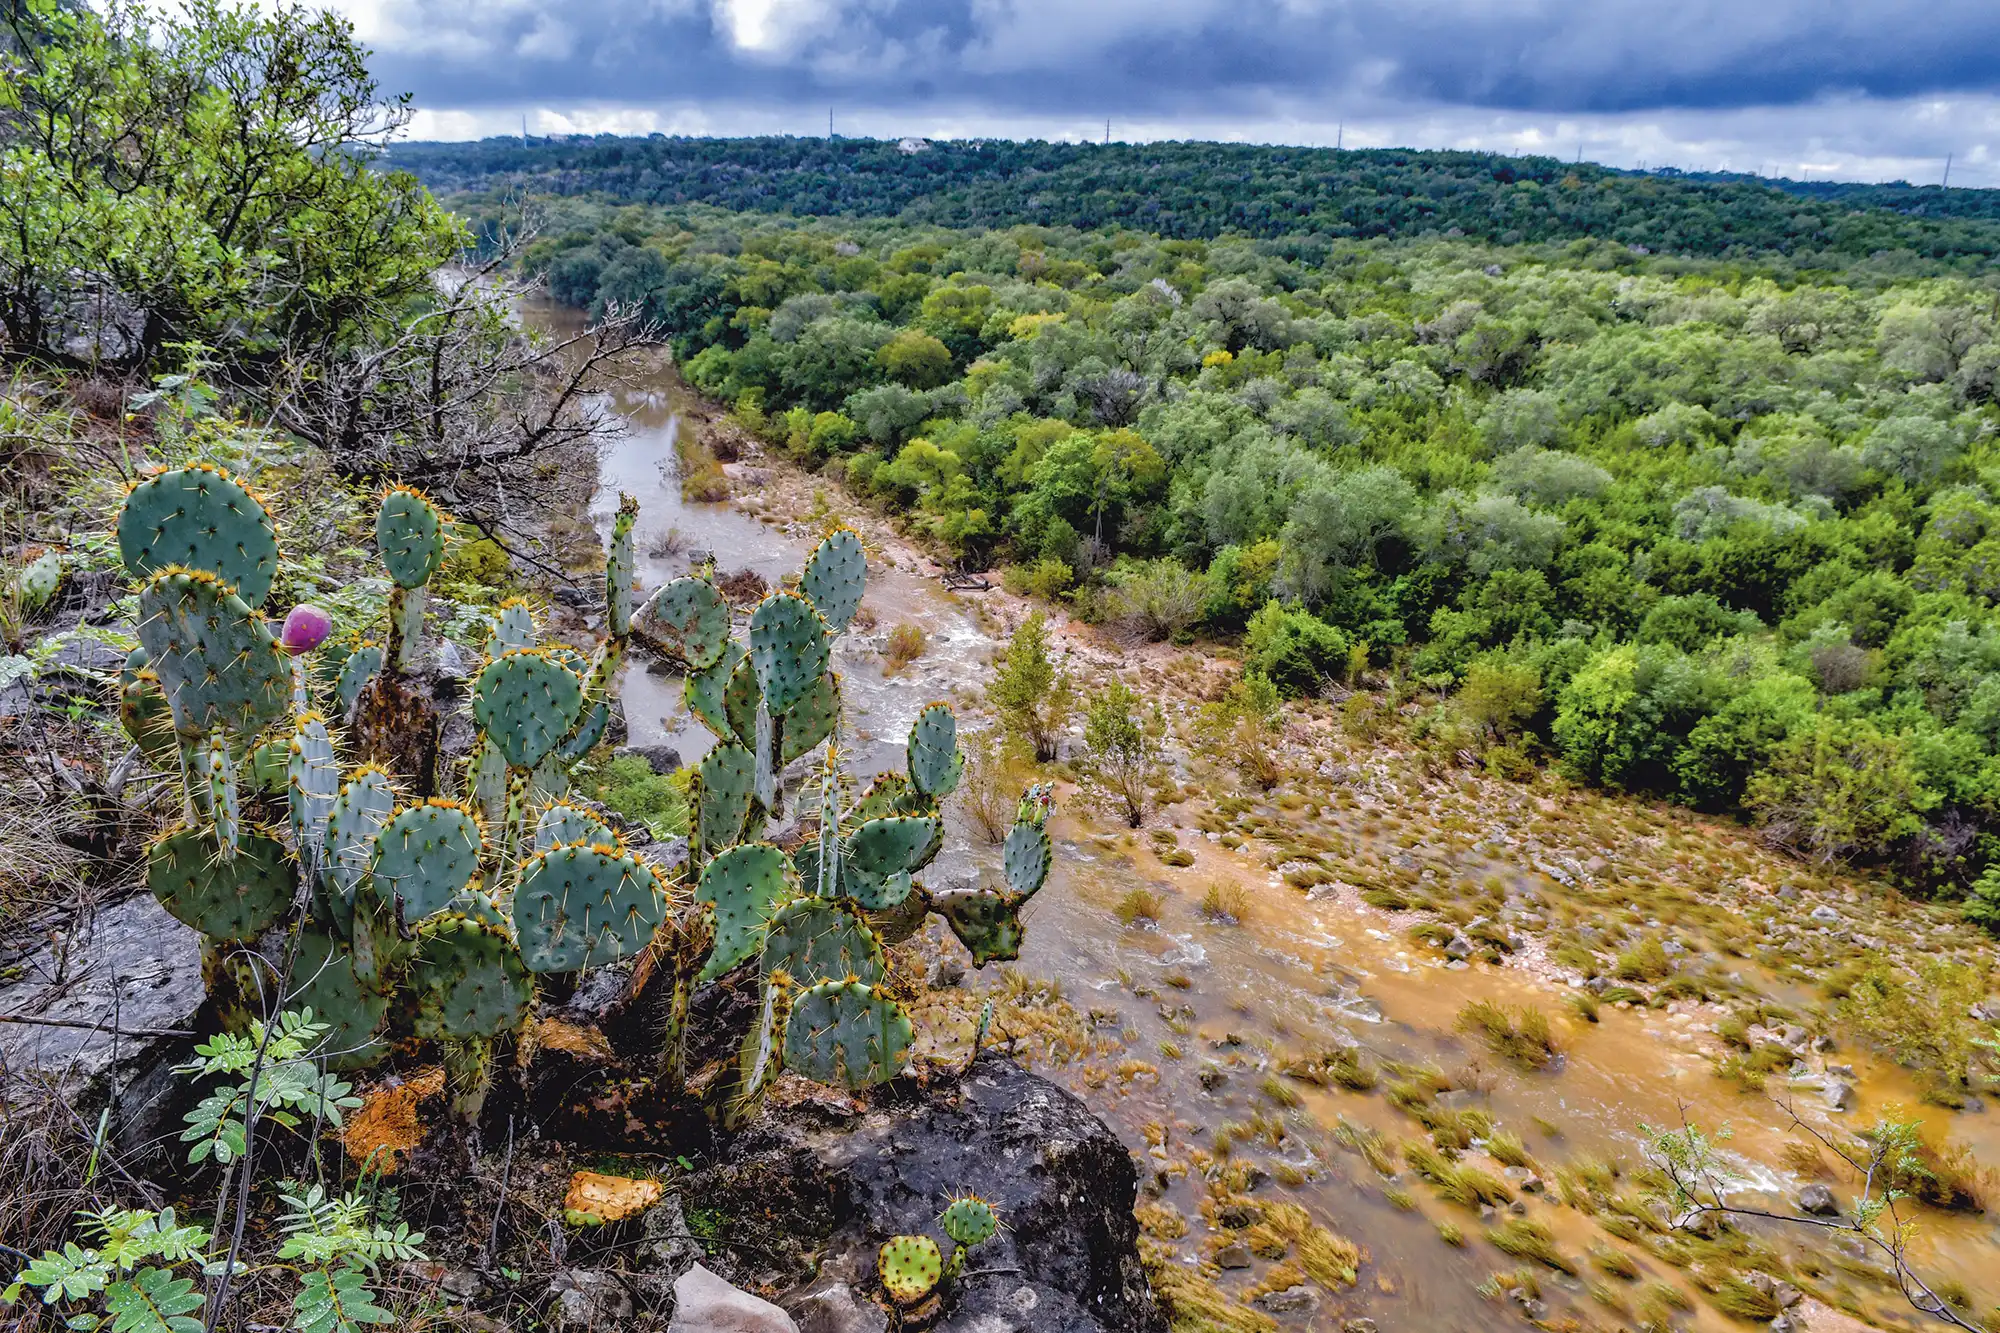 Expansive forests of Bracken Cave Preserve with cacti in the foreground